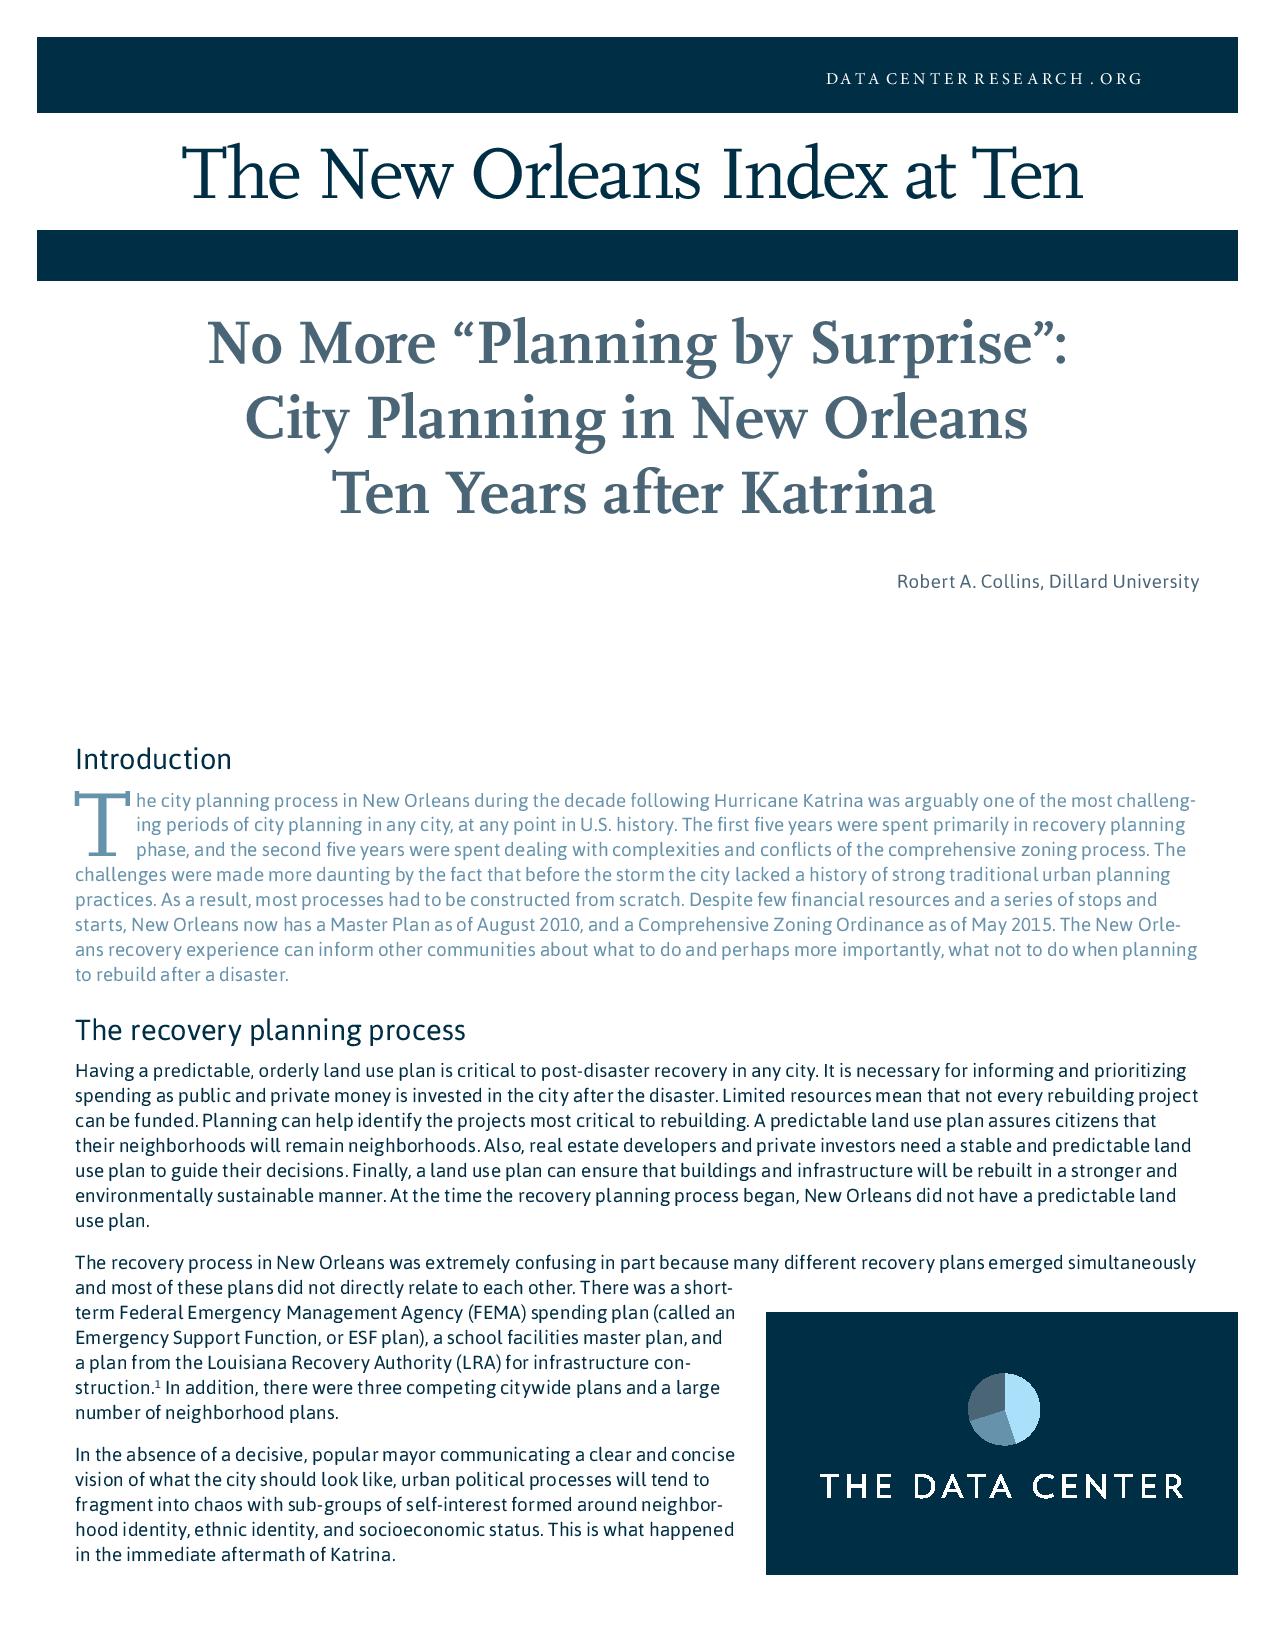 No More “Planning by Surprise”: City Planning in New Orleans Ten Years after Katrina